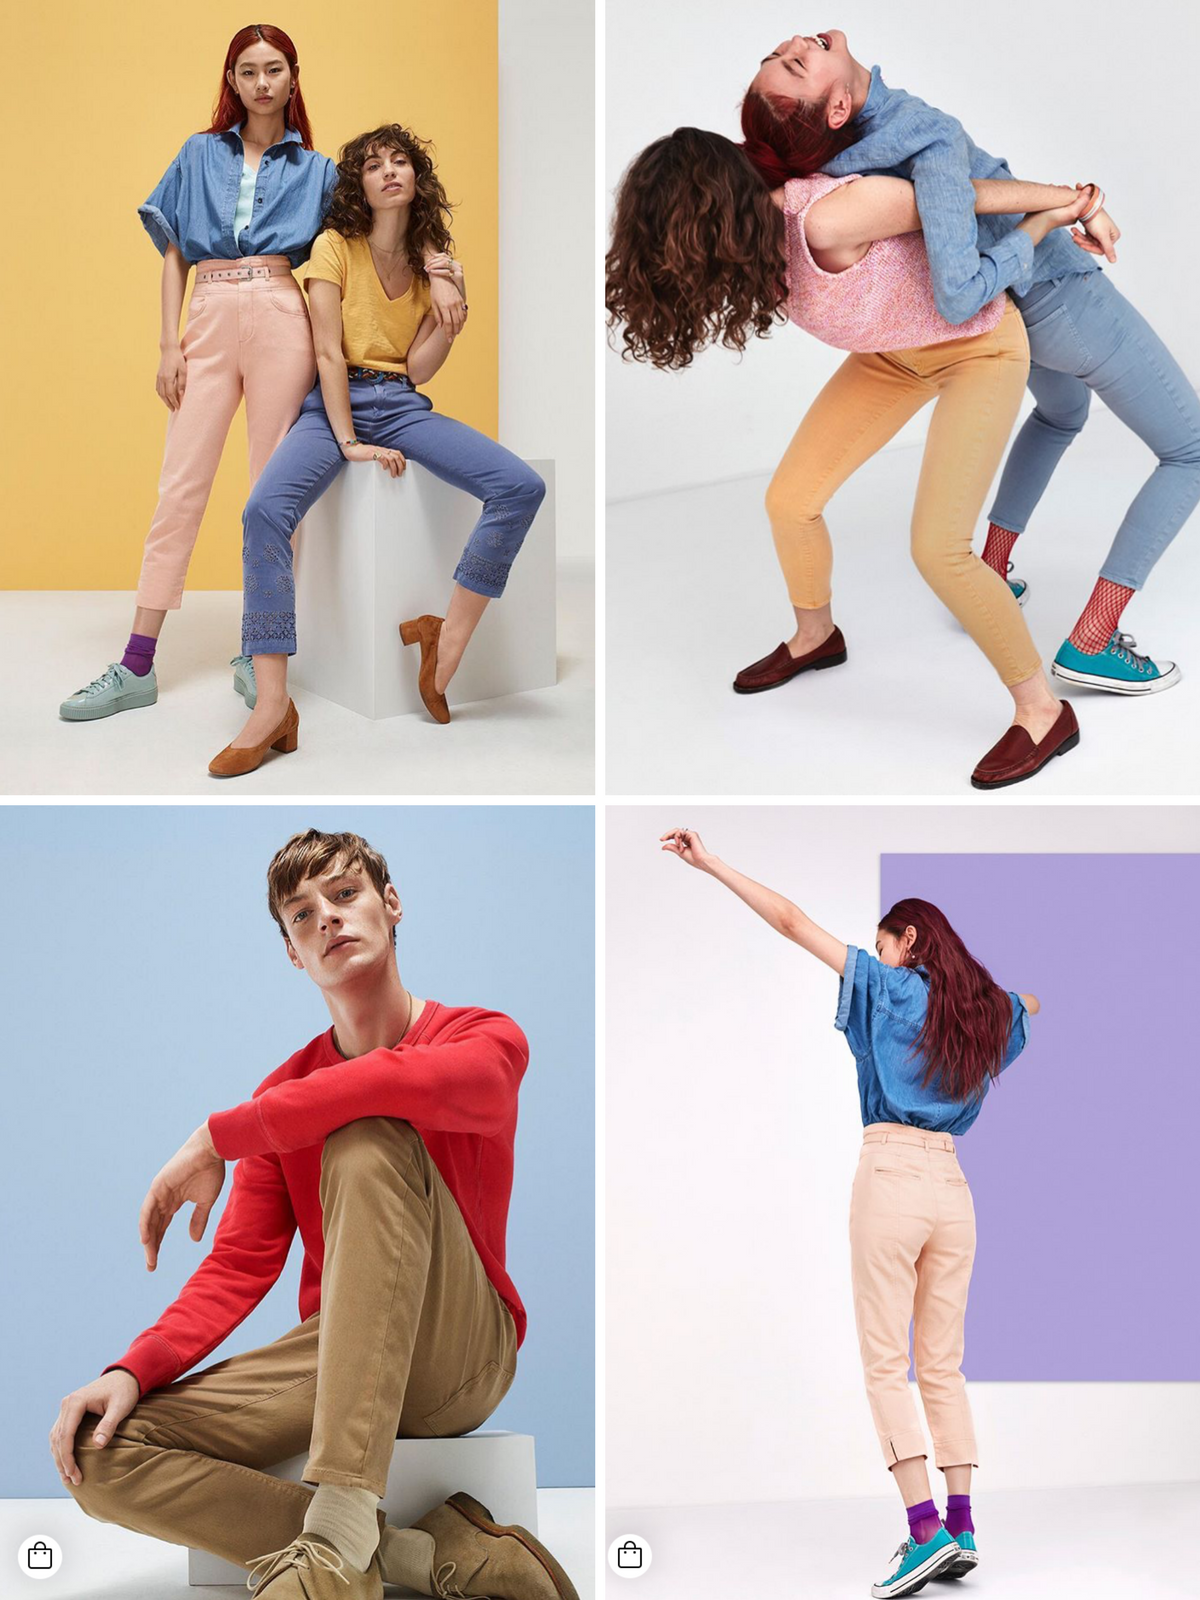 men and women wearing colorful socks and clothing